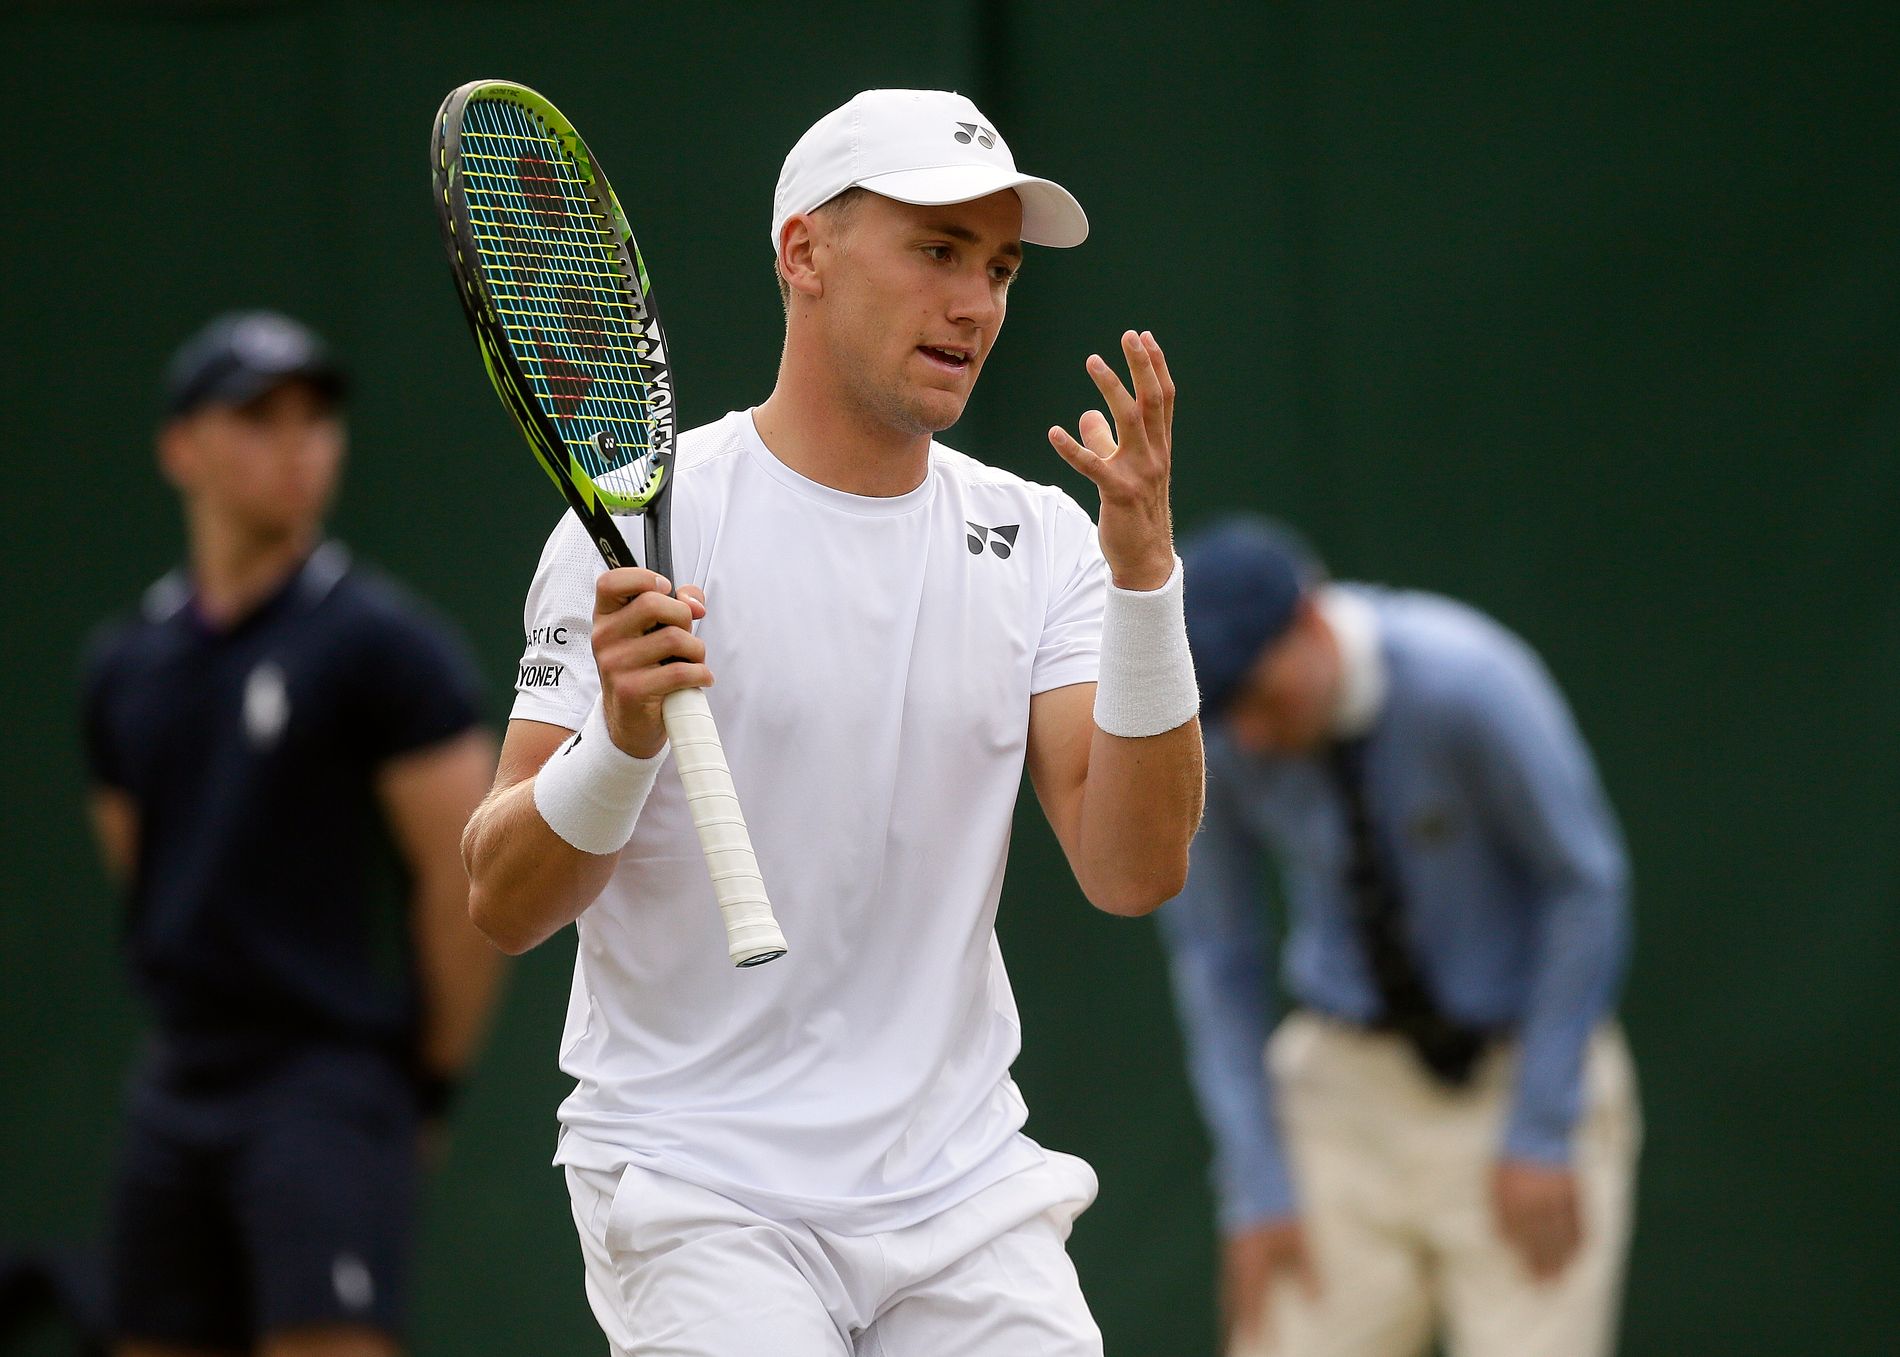 Wimbledon 2022 LIVE: From Novak Djokovic to Carlos Alcaraz, Top contenders for Men's singles title at Wimbledon 2022 - Check Out 